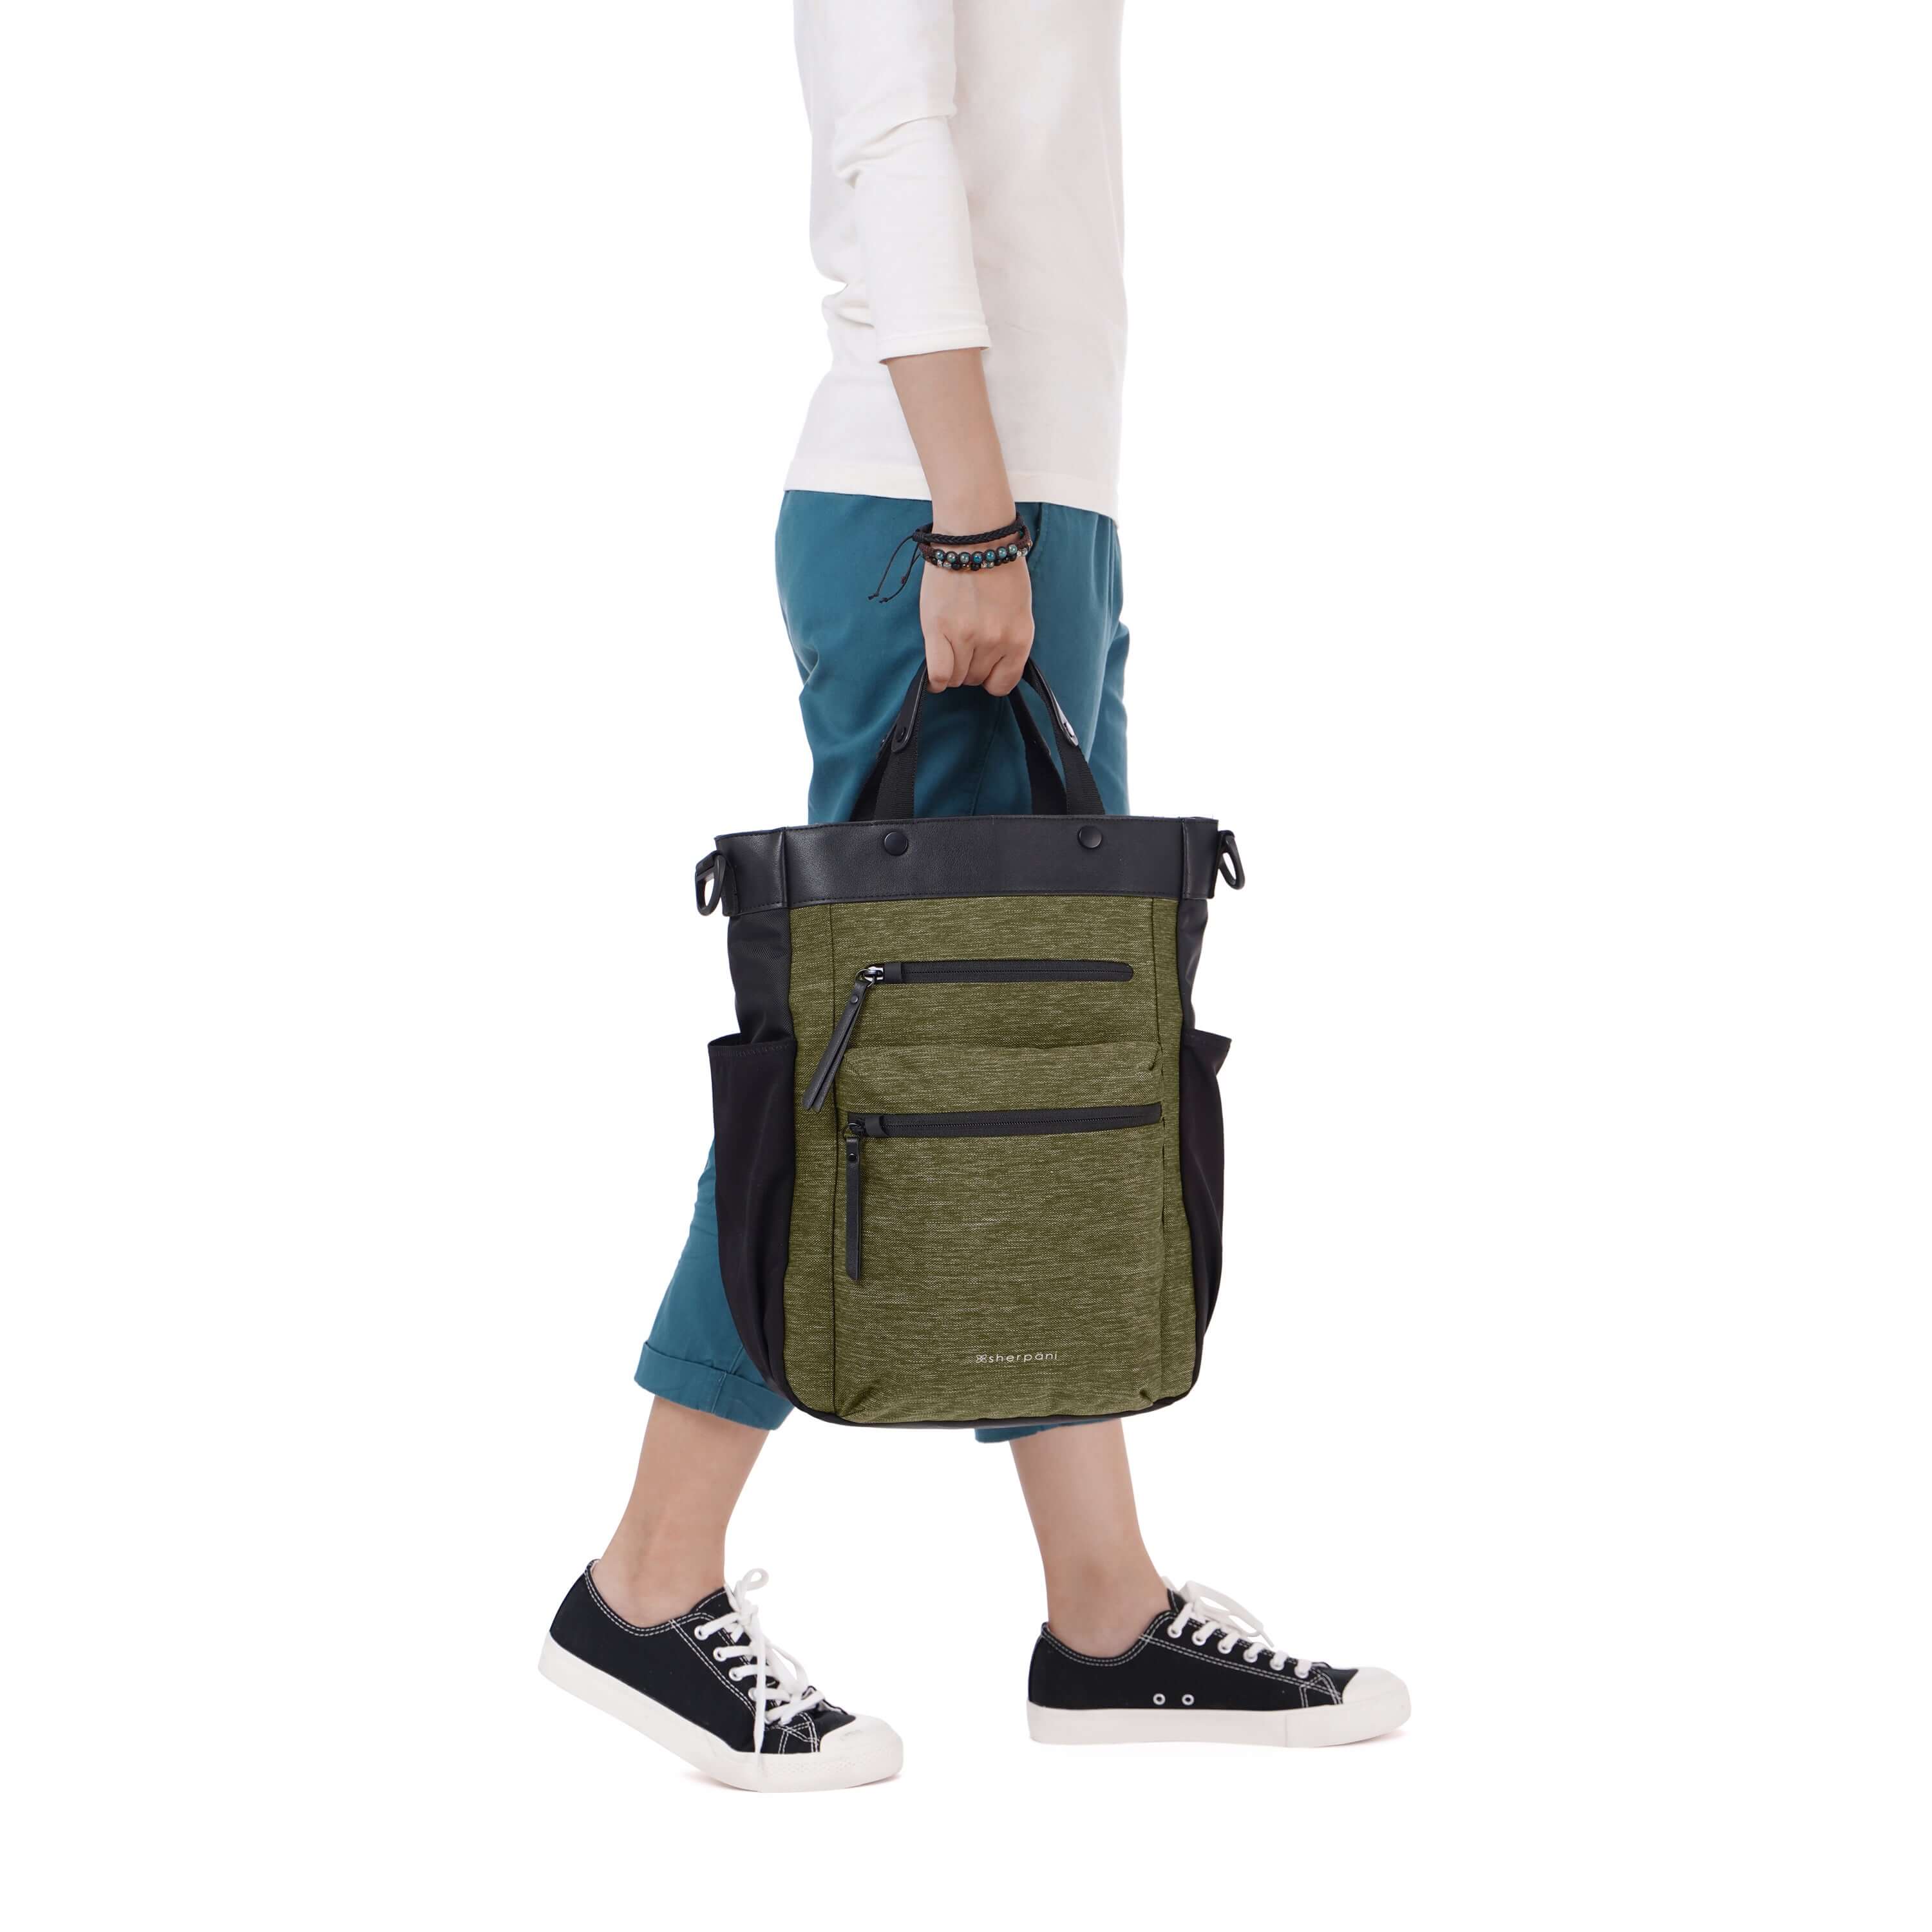 Side view of a model walking. She is wearing a white shirt and blue pants. She is carrying Sherpani’s Anti-Theft bag, the Soleil AT in Loden by the tote handles.